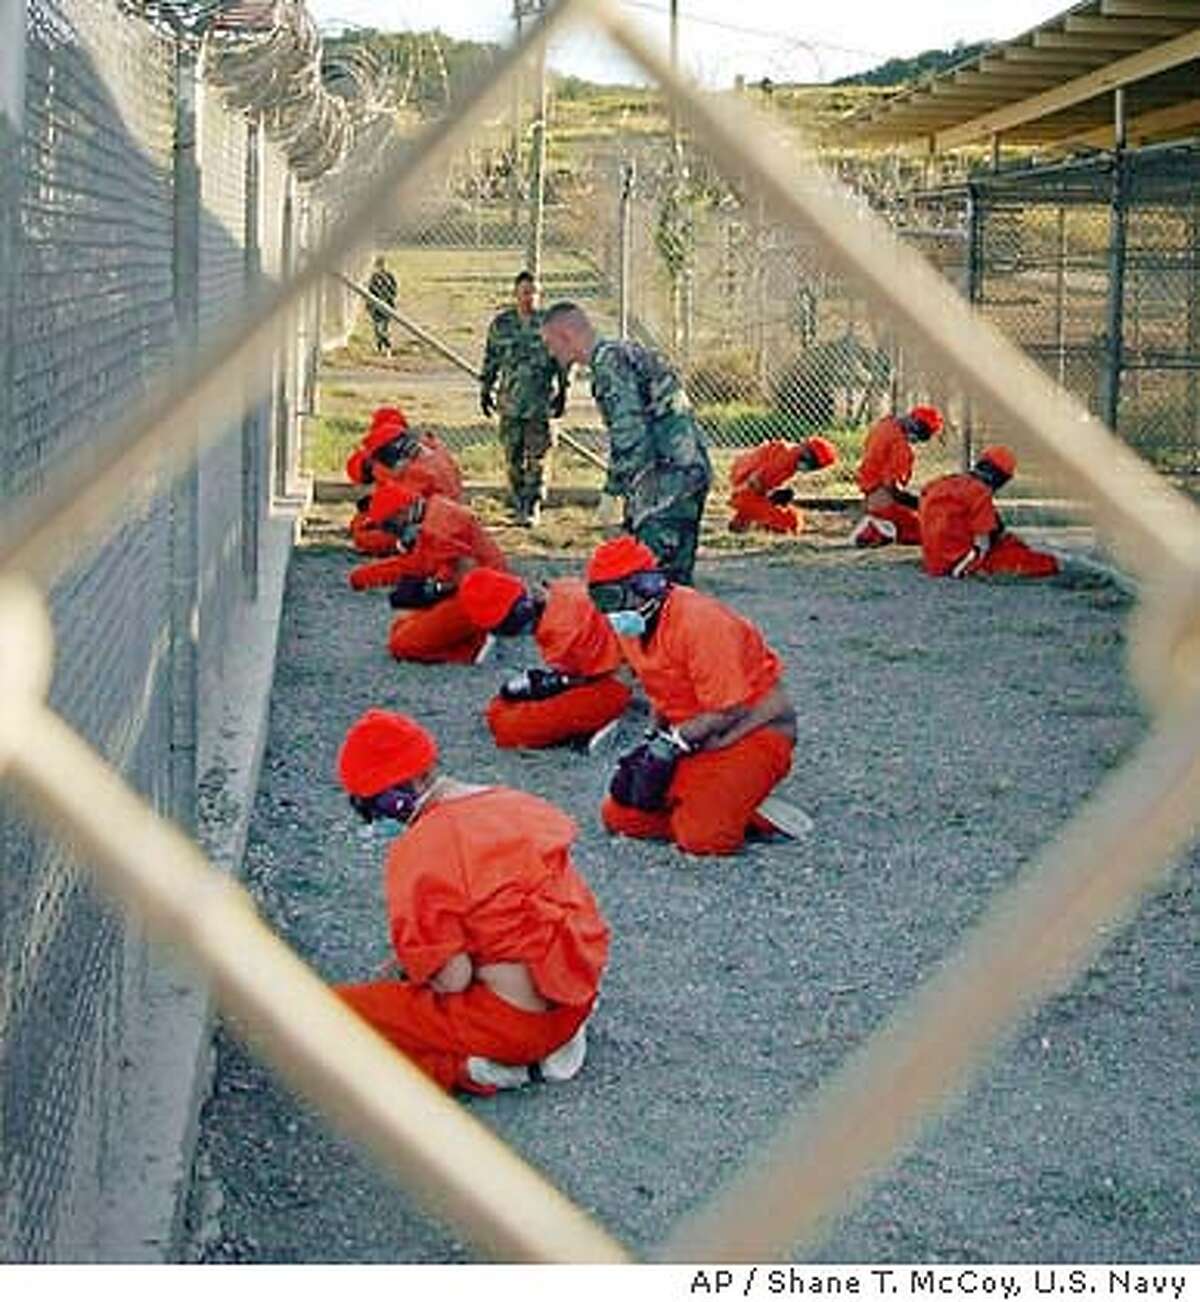 ** FILE ** Taliban and al-Qaida detainees sit in a holding area at Camp X-Ray at Guantanamo Bay, Cuba, during in-processing to the temporary detention facility in this Jan. 11, 2002 file photo. Controversy over prisoner abuse at U.S.-run prisons in Iraq and Afghanistan has left the Guantanamo Bay, Cuba, detention facility for terrorist suspects largely untouched. but that may soon change. A senior Navy admiral who briefly visited Guantanamo Bay in early May has recommended a more in depth look at how prisoners were treated there. (AP Photo/U.S. Navy, Shane T.McCoy)